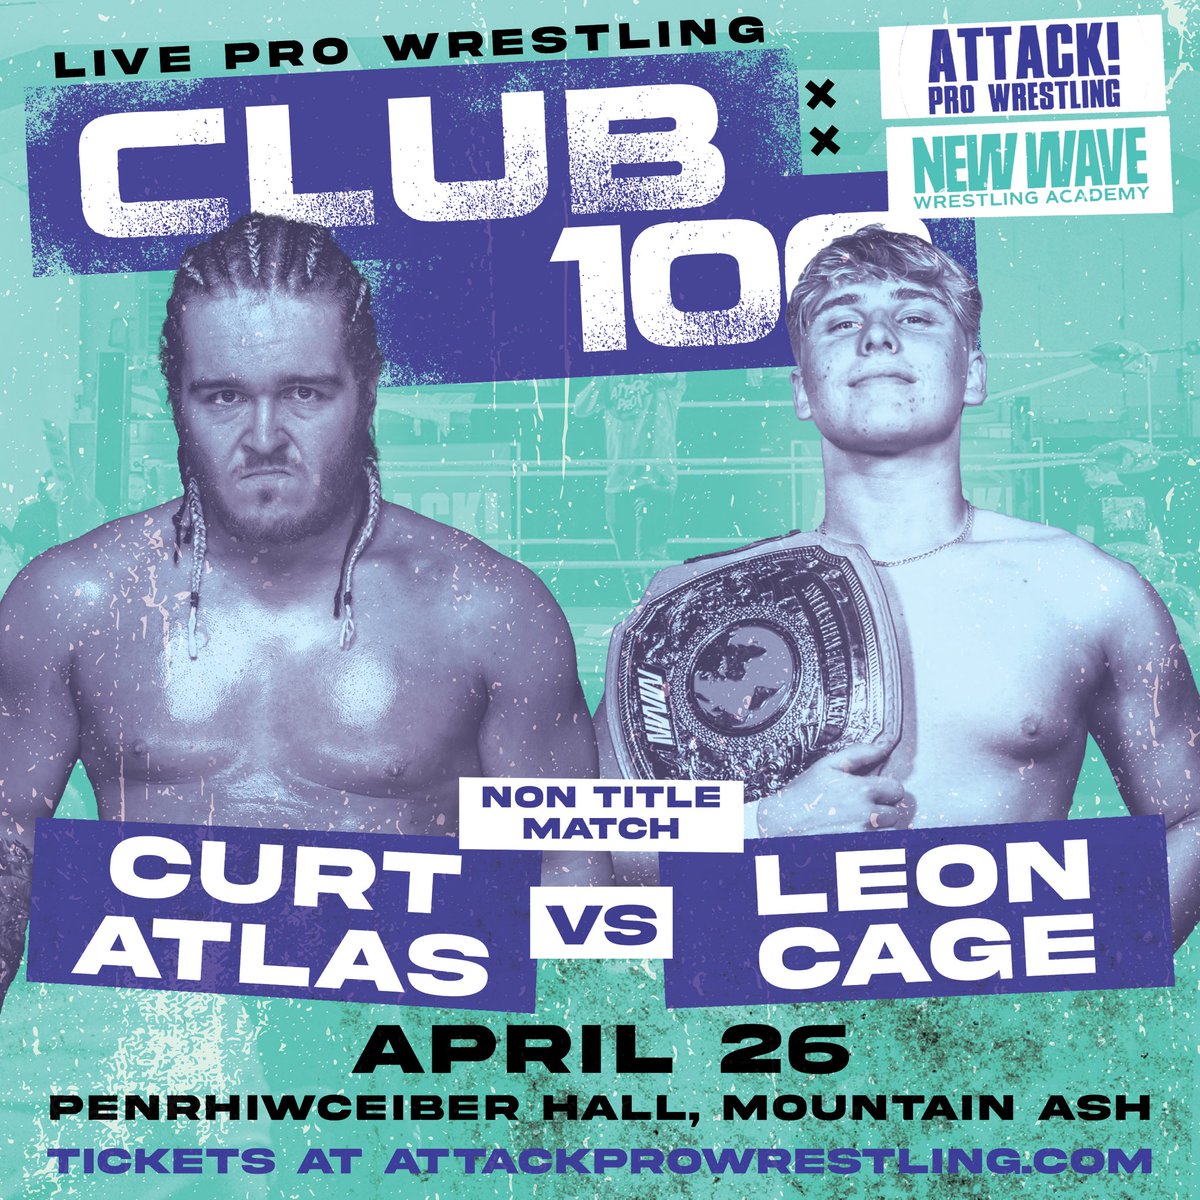 Match Announcement! 📣 We have New Wave action as NWW champion Leon Cage goes one on one with Curt Atlas! This is a showcase into the future of Welsh wrestling and could have NWW title match ramifications down the line!! Club 100 APRIL 26th🔥 ⬇️⬇️ ringsideworld.co.uk/event6793/atta…